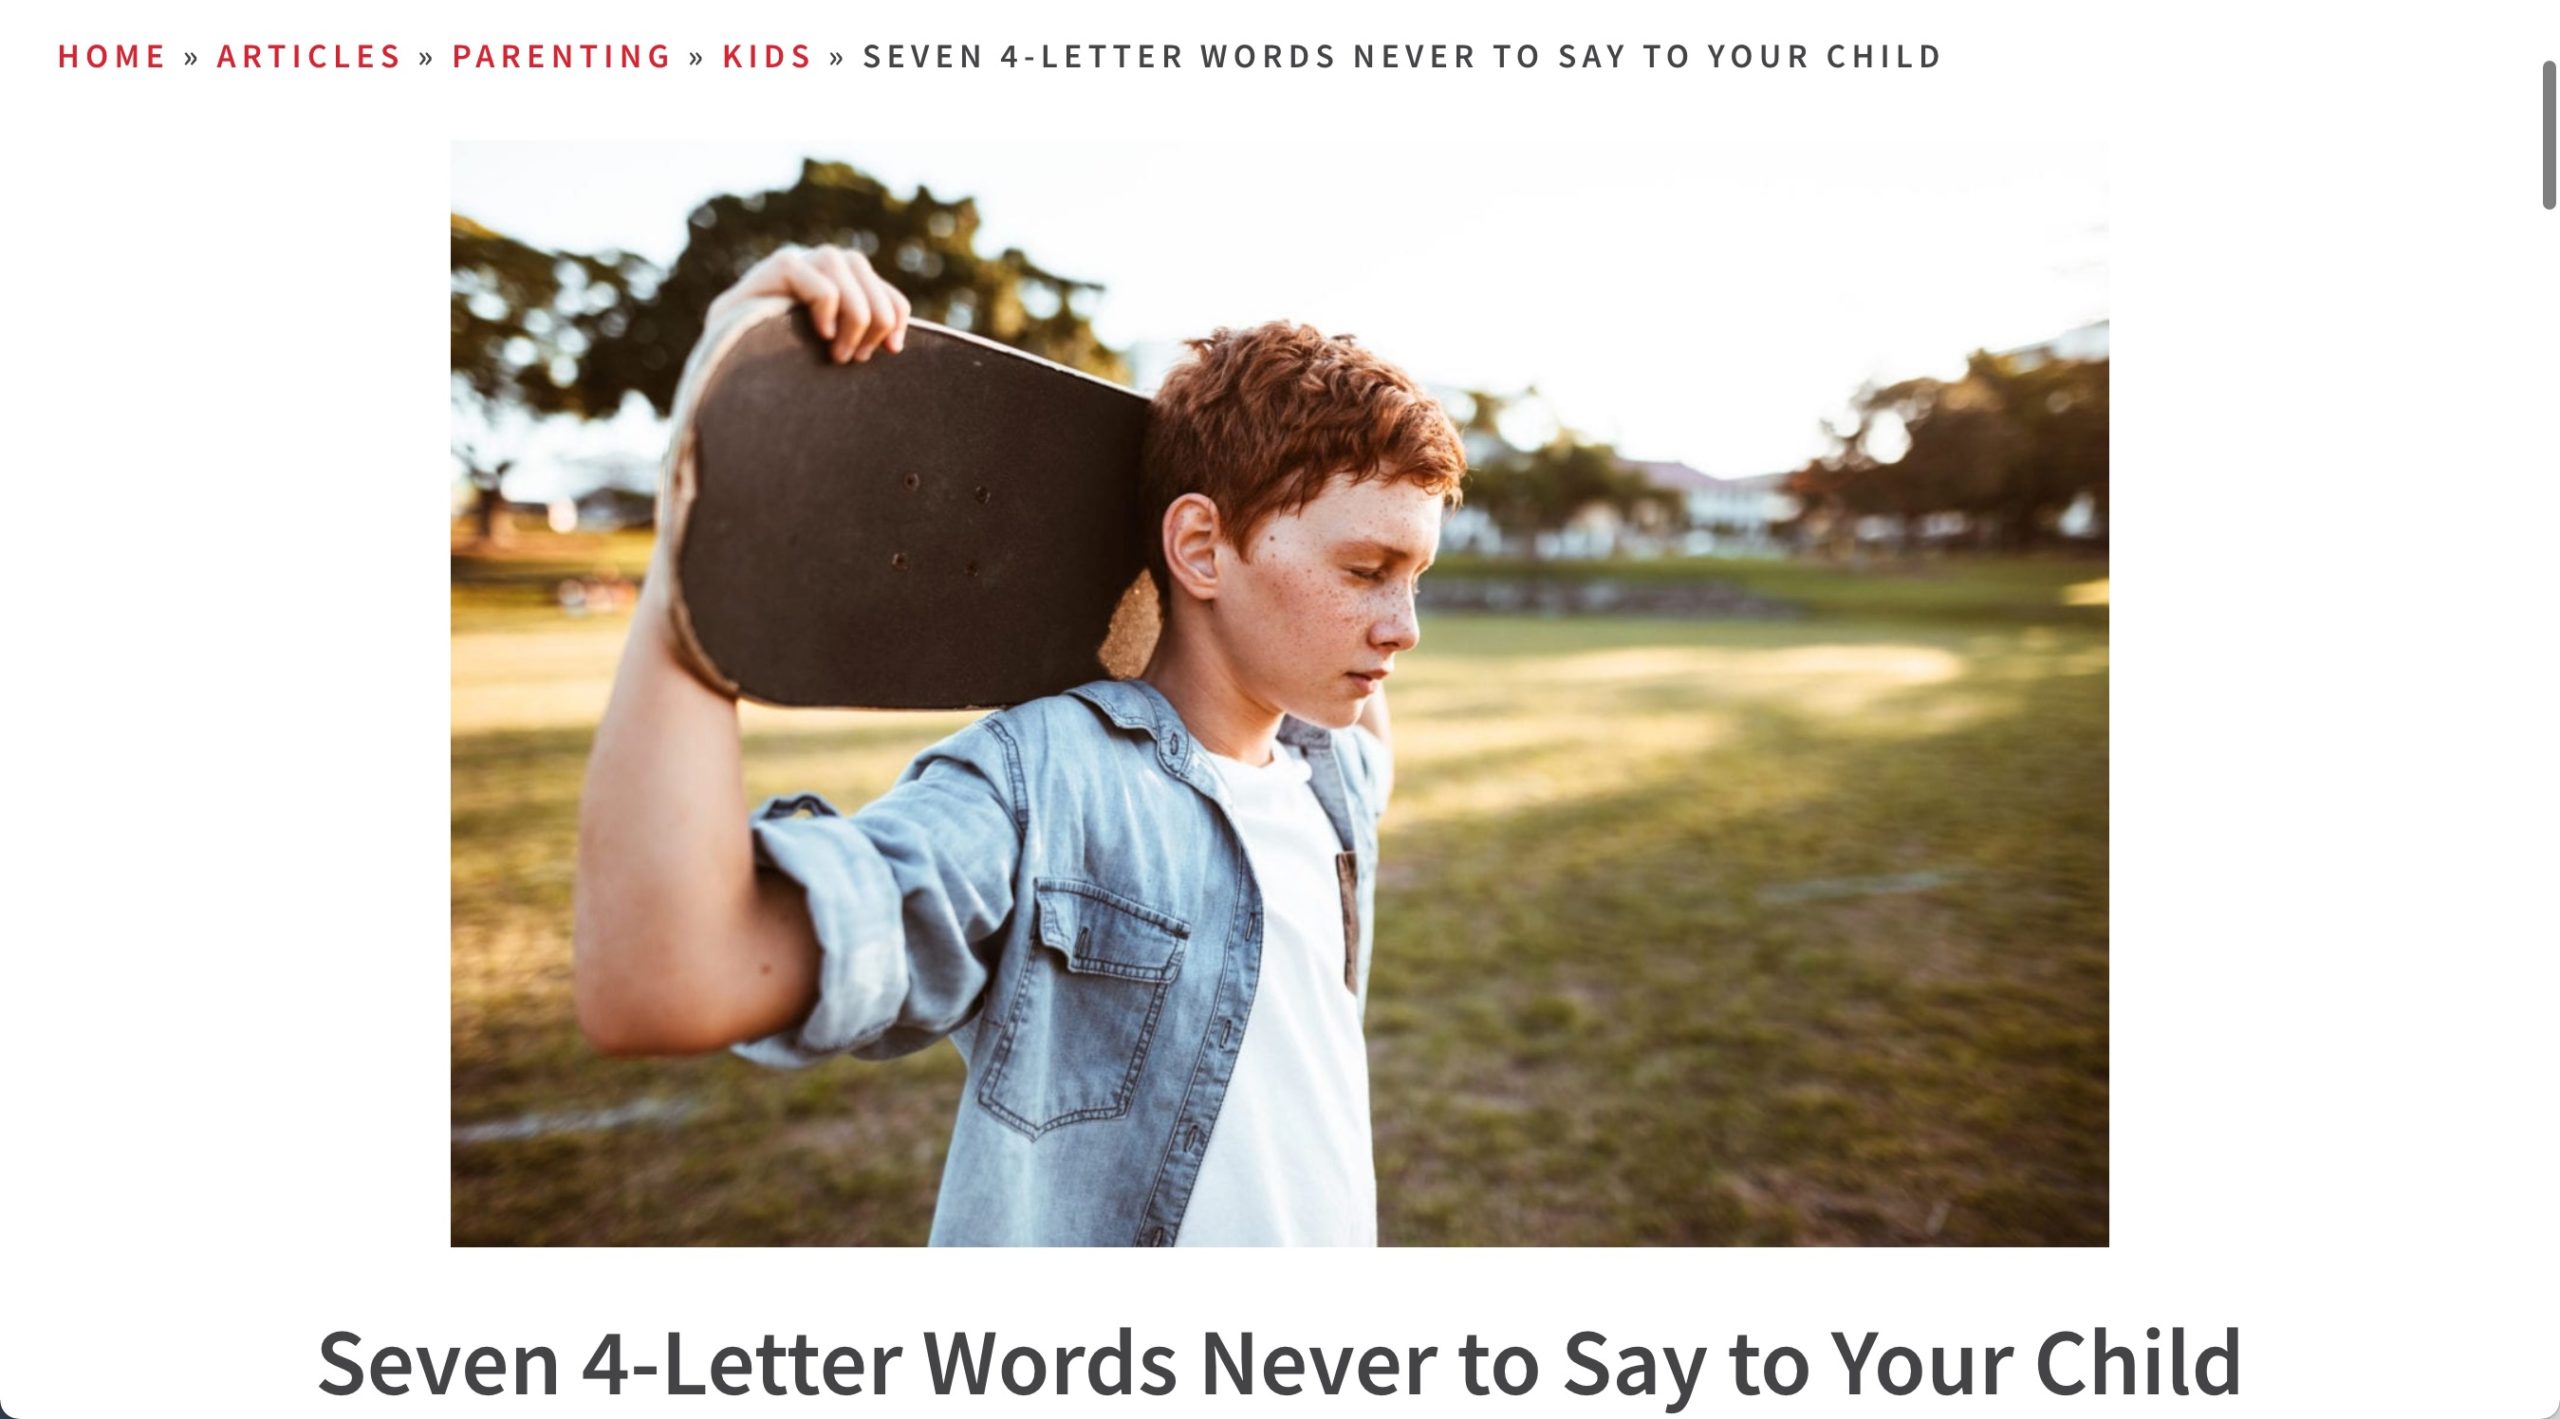 Screenshot of 7 4-letter words article published on All Pro Dad